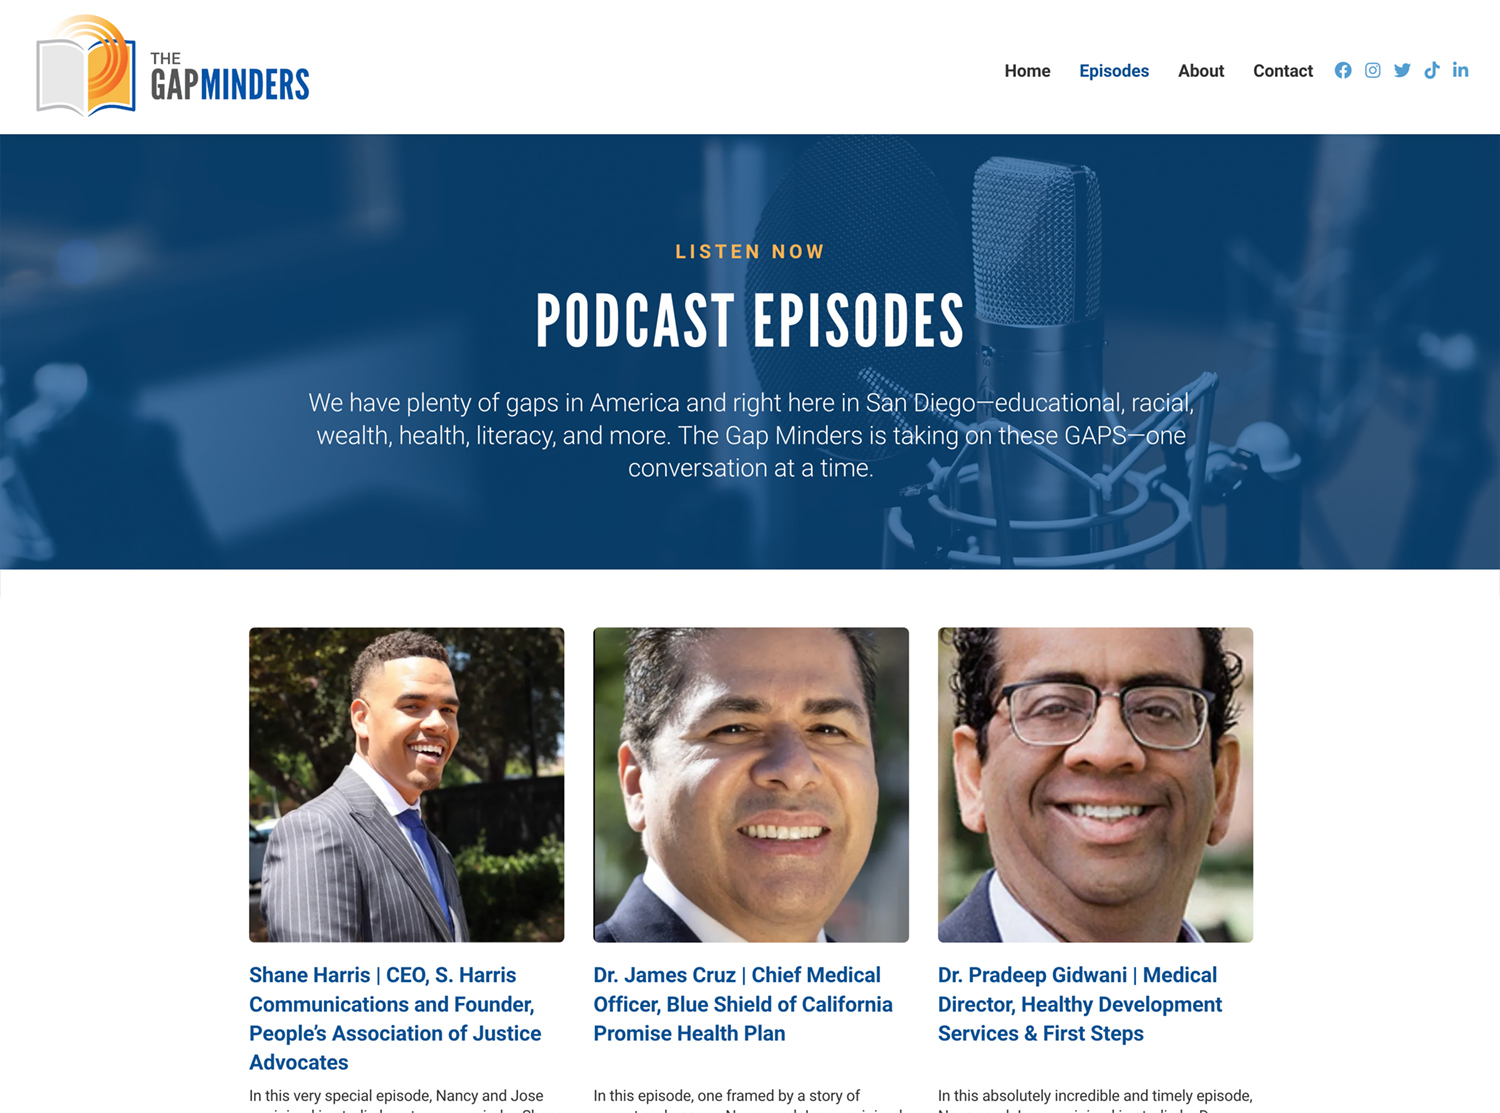 The Gap Minders podcast episodes